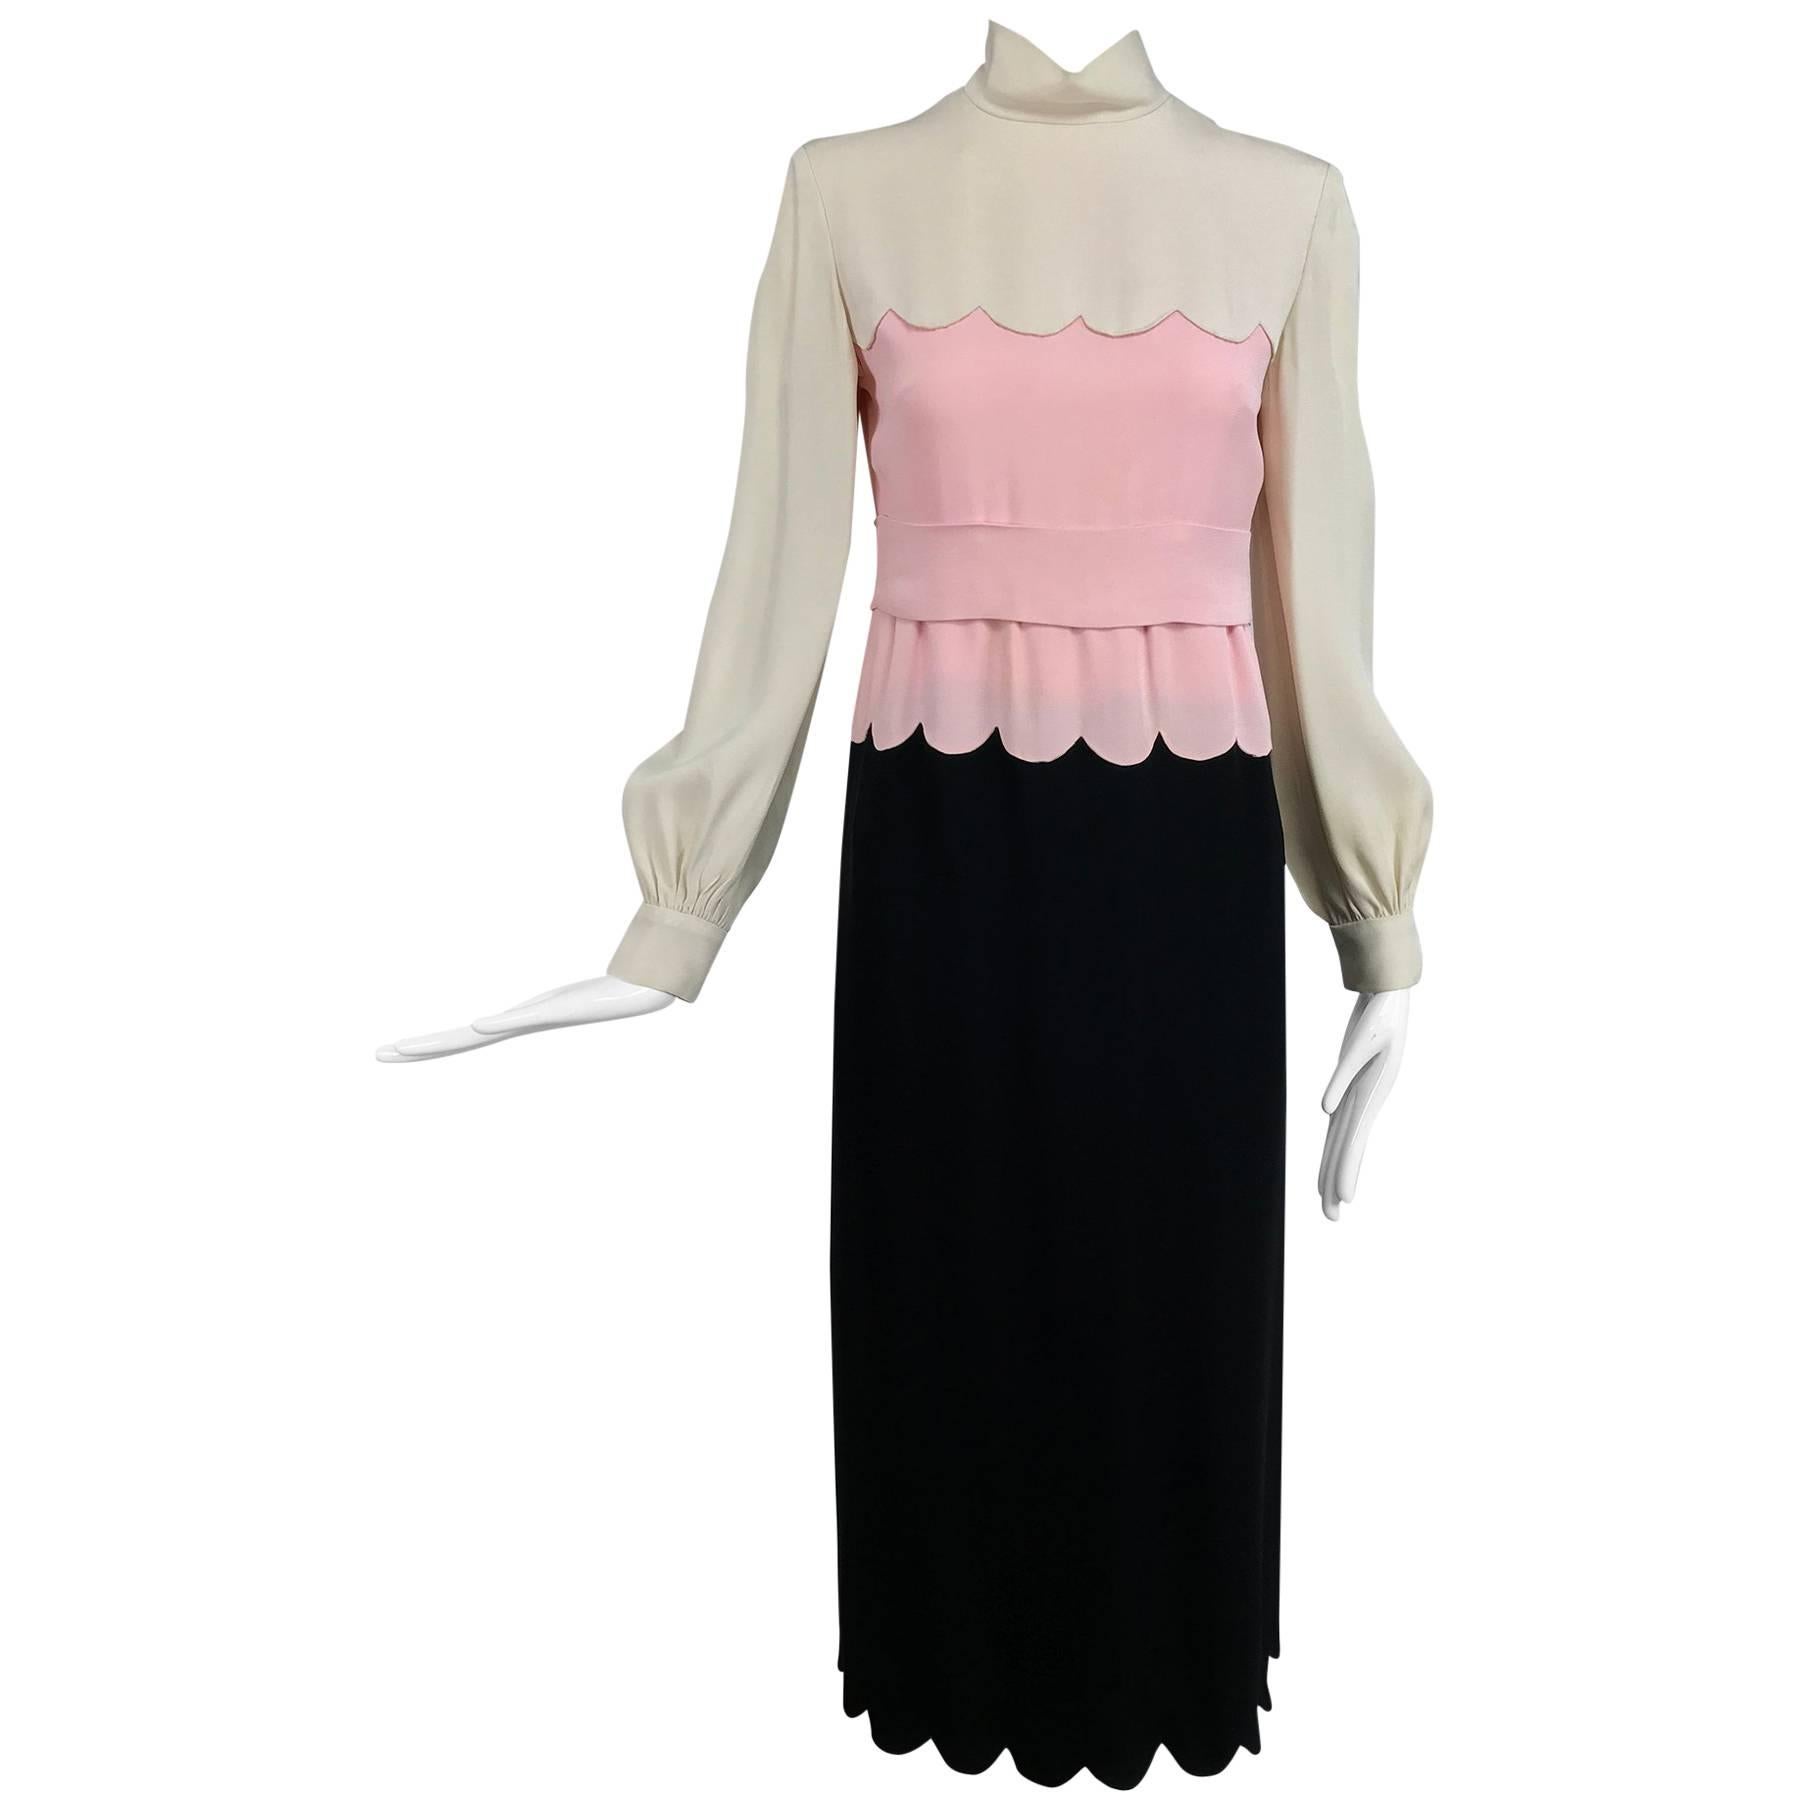 Donald Brooks scalloped crepe dress in cream pink and black 1960s